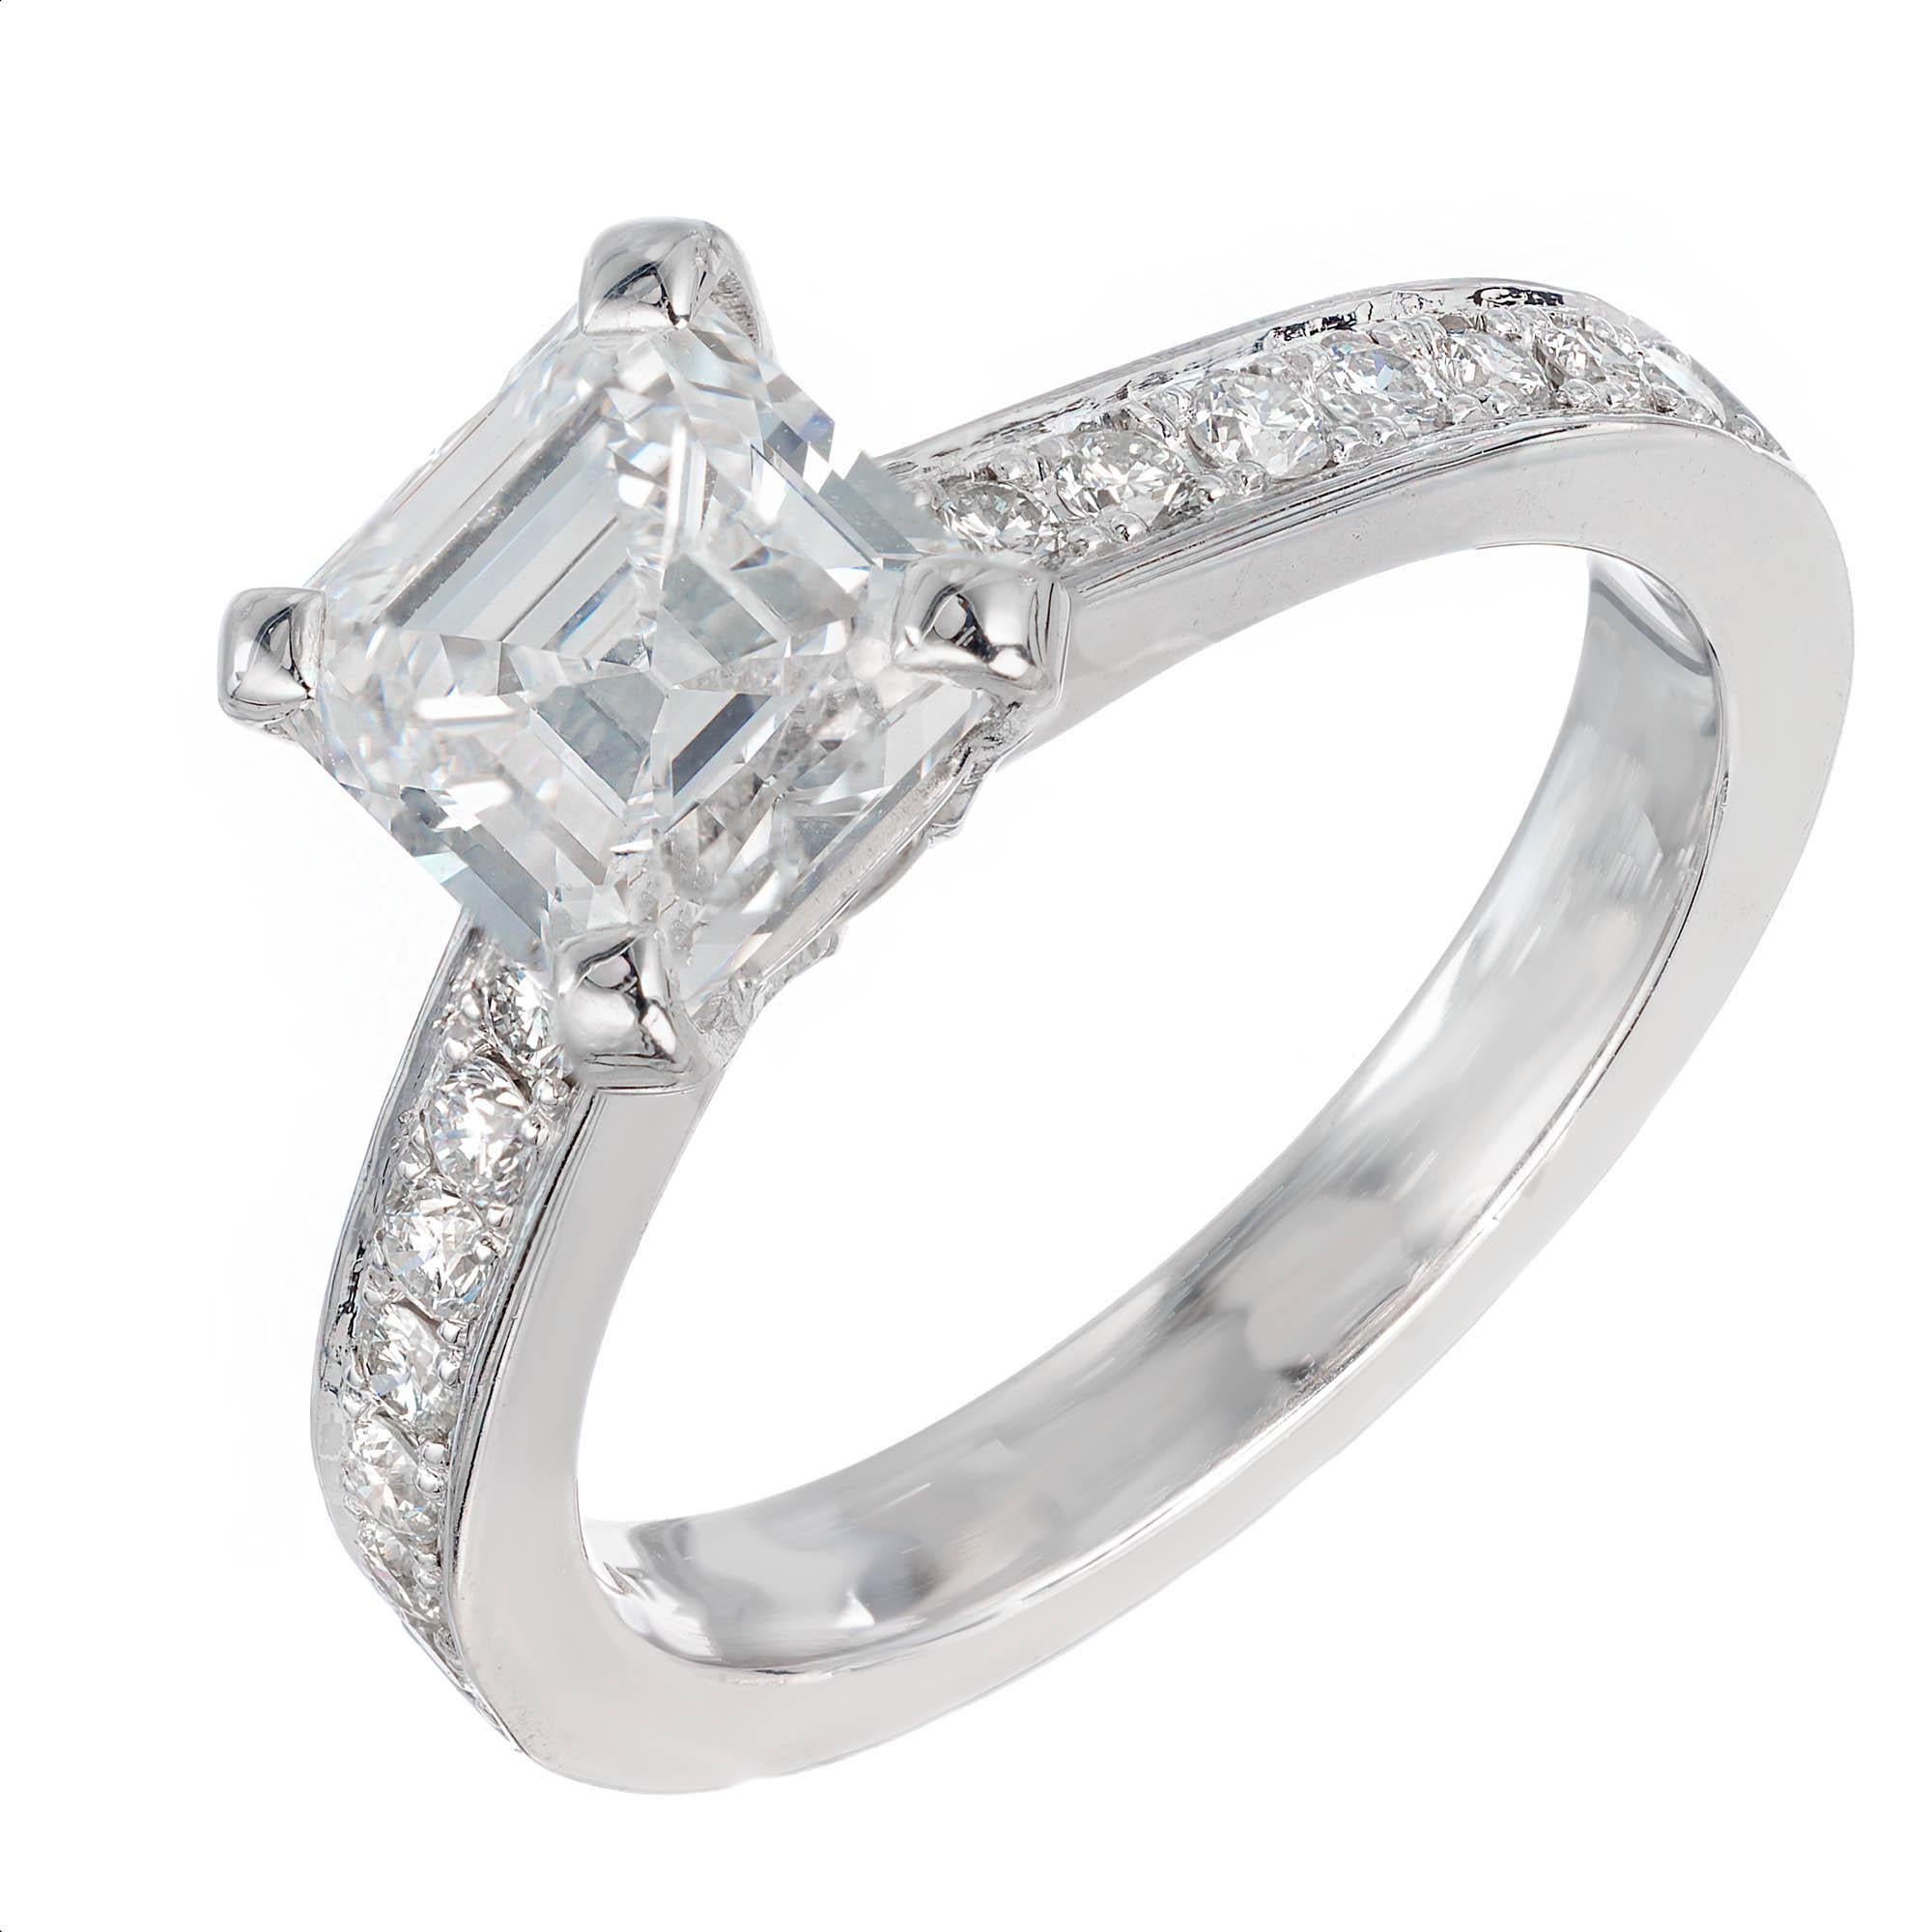 Peter Suchy diamond engagement ring. Extra sparkly asscher cut center diamond in a handmade platinum setting with 14 accent diamonds designed to show off the sparkle and beauty of the stone. 

1 Asscher cut E VS1 diamond, Approximate 1.83 carats.